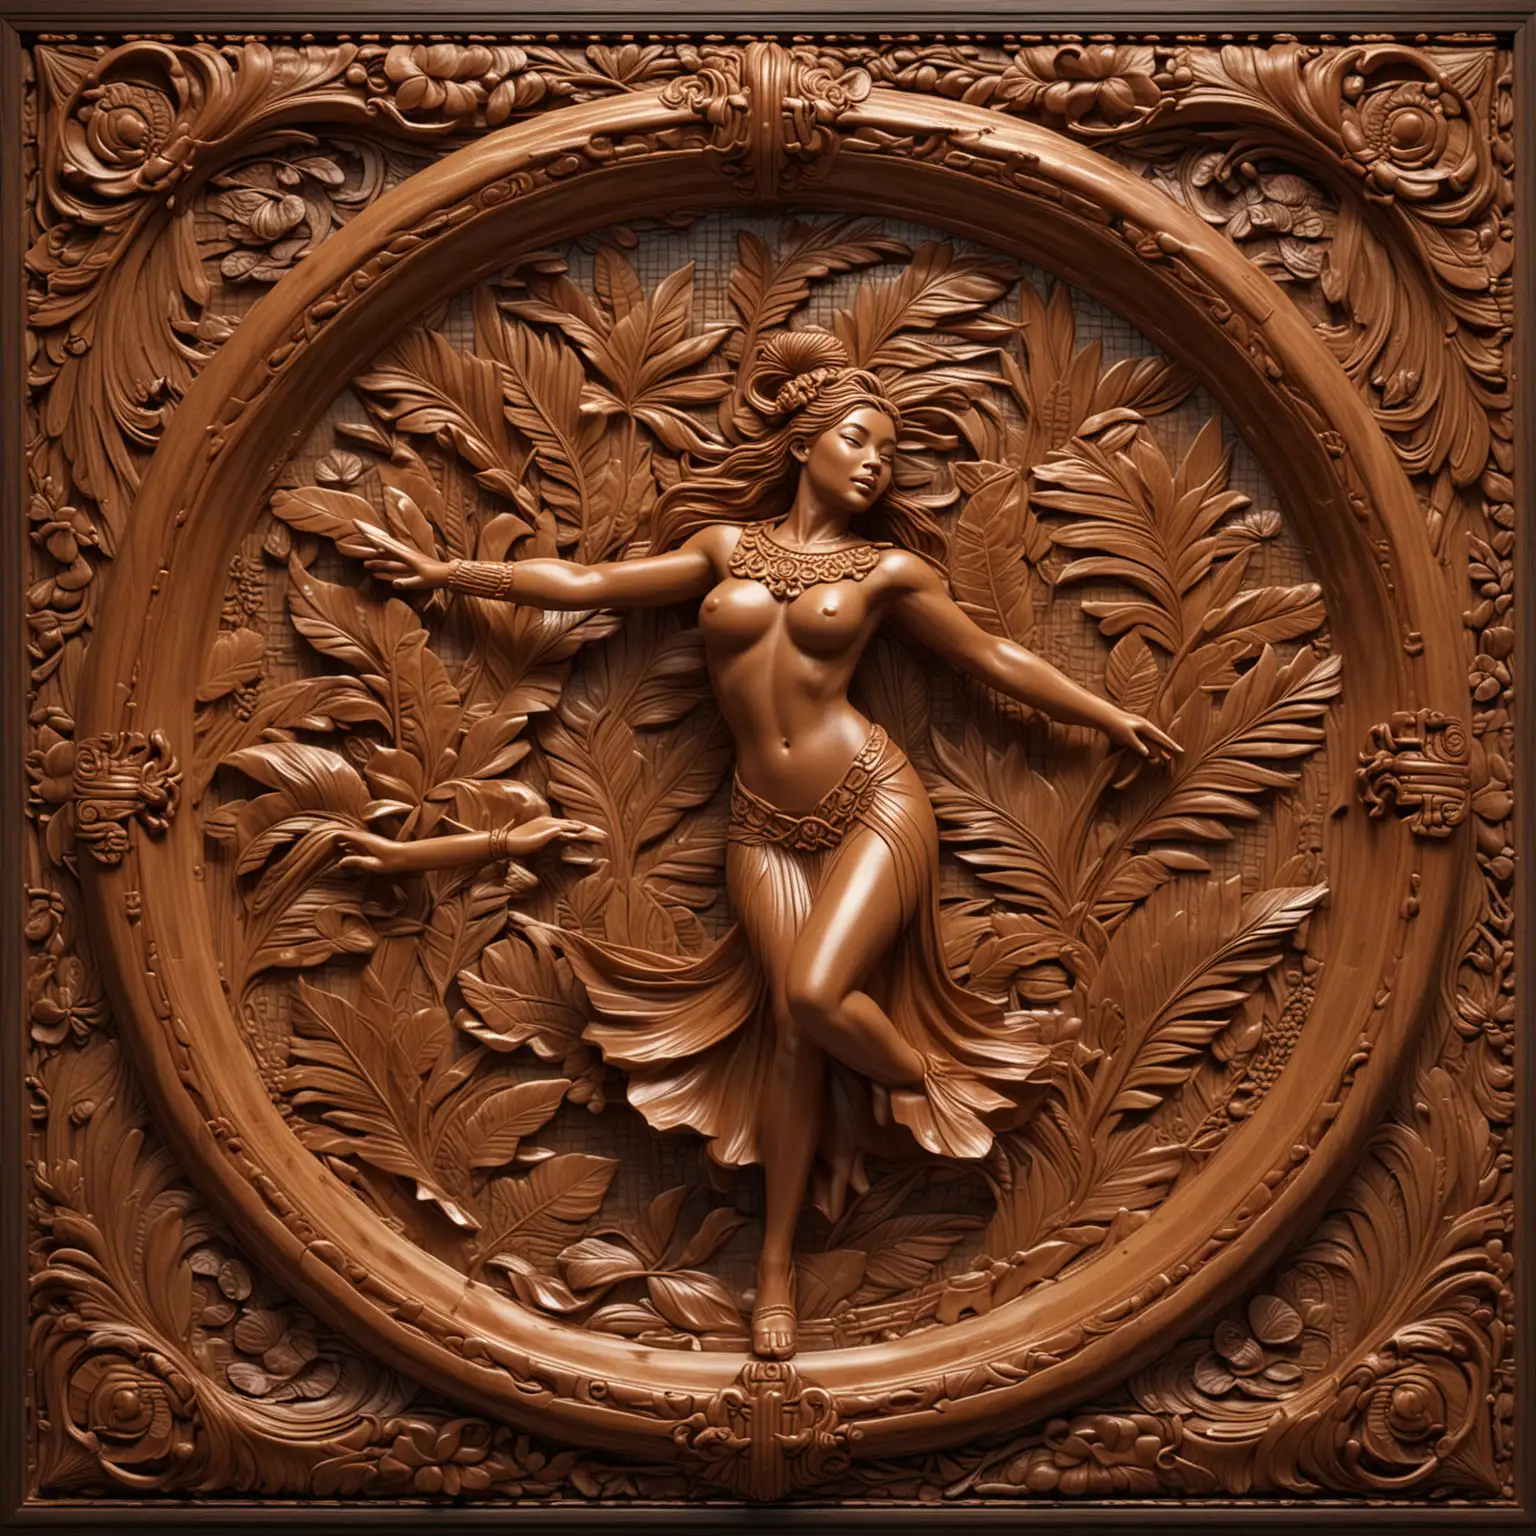 3D SEAMLESS AND TILEABLE  LACQUERED WOOD WITH A FINELY CARVED FRAMED SURROUND FEATURING A CARVED WOOD HAWAIIAN DANCER





